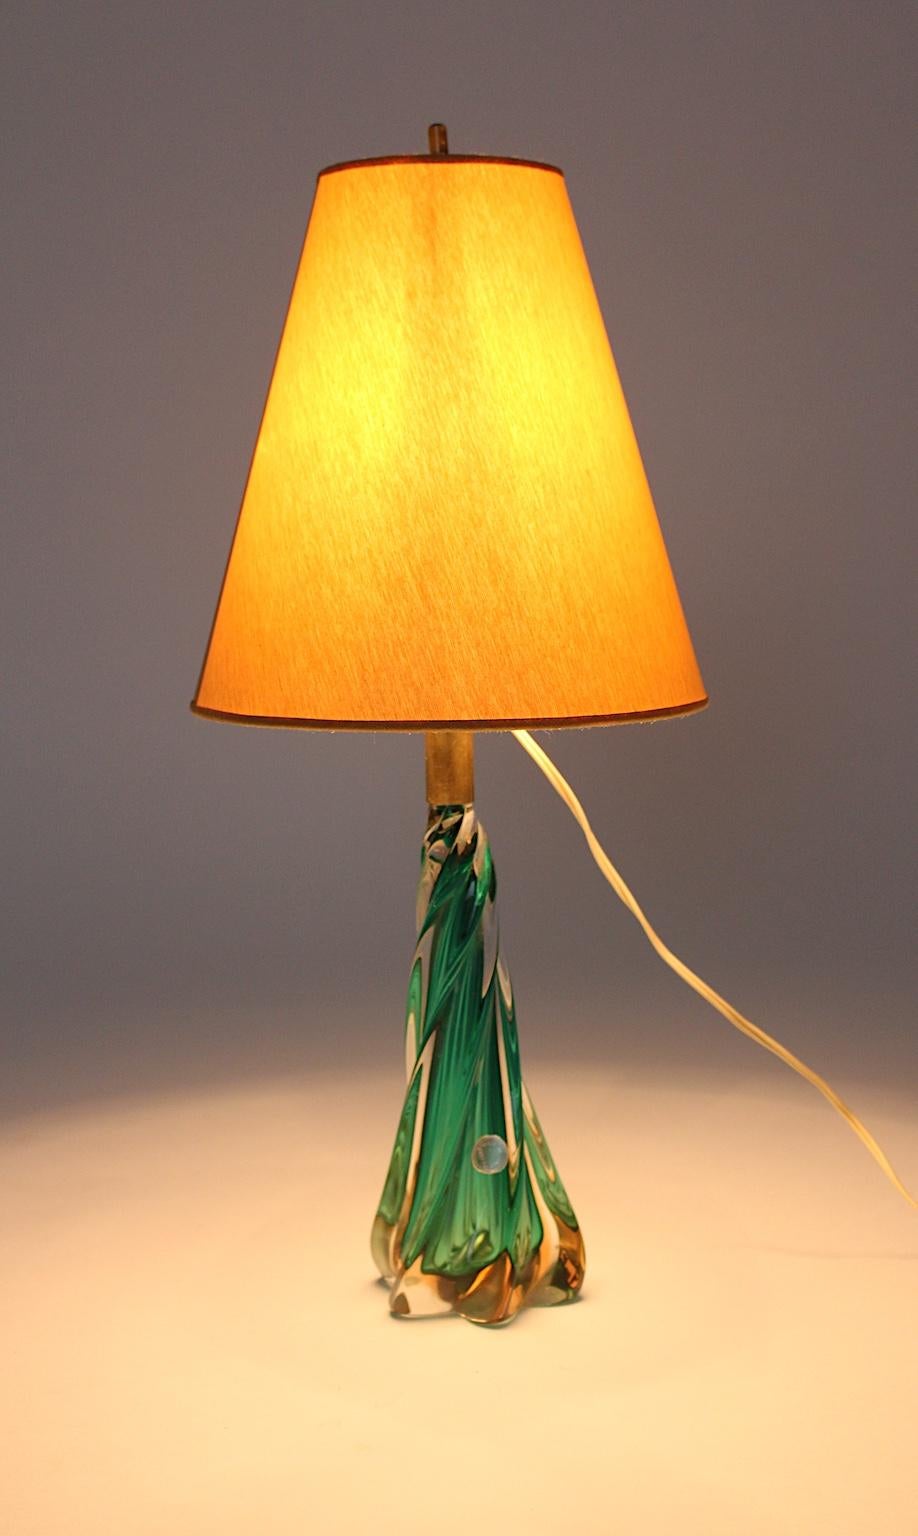 Mid-Century Modern vintage glass table lamp, which was designed and manufactured in Murano, Venice, Italy, 1950s.
The beautiful twisted green table base was made of hand blown glass with golden sprinkles and shows also brass details, one Bakelite E